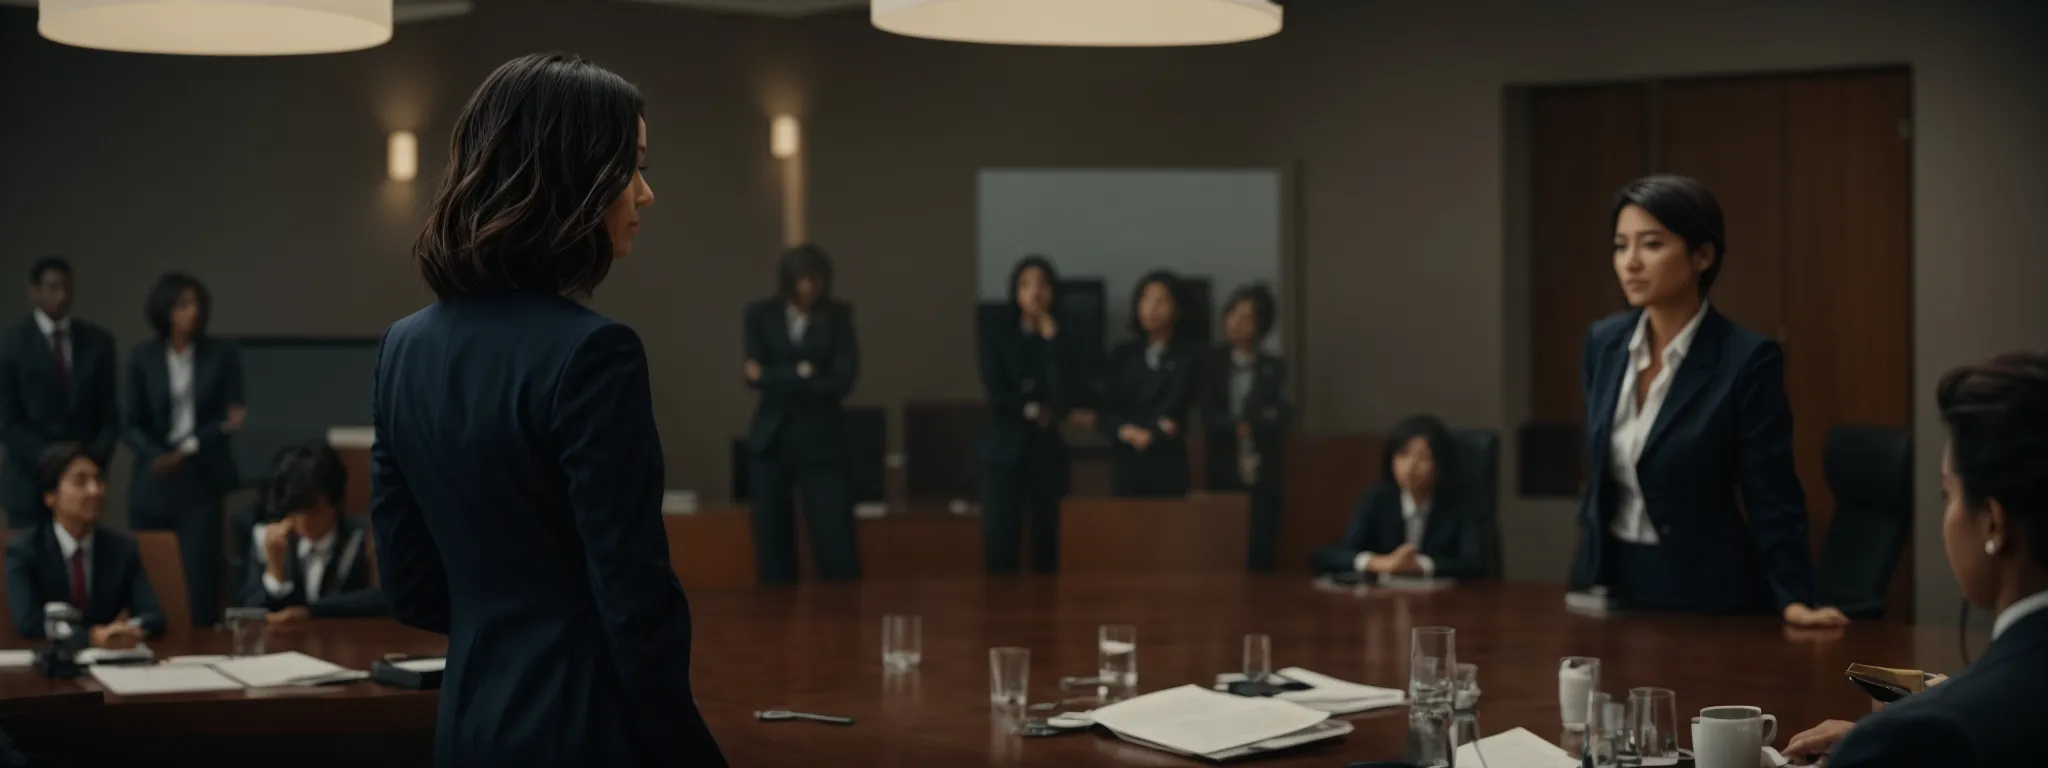 a confident woman standing tall at the helm of a boardroom, addressing diverse colleagues.